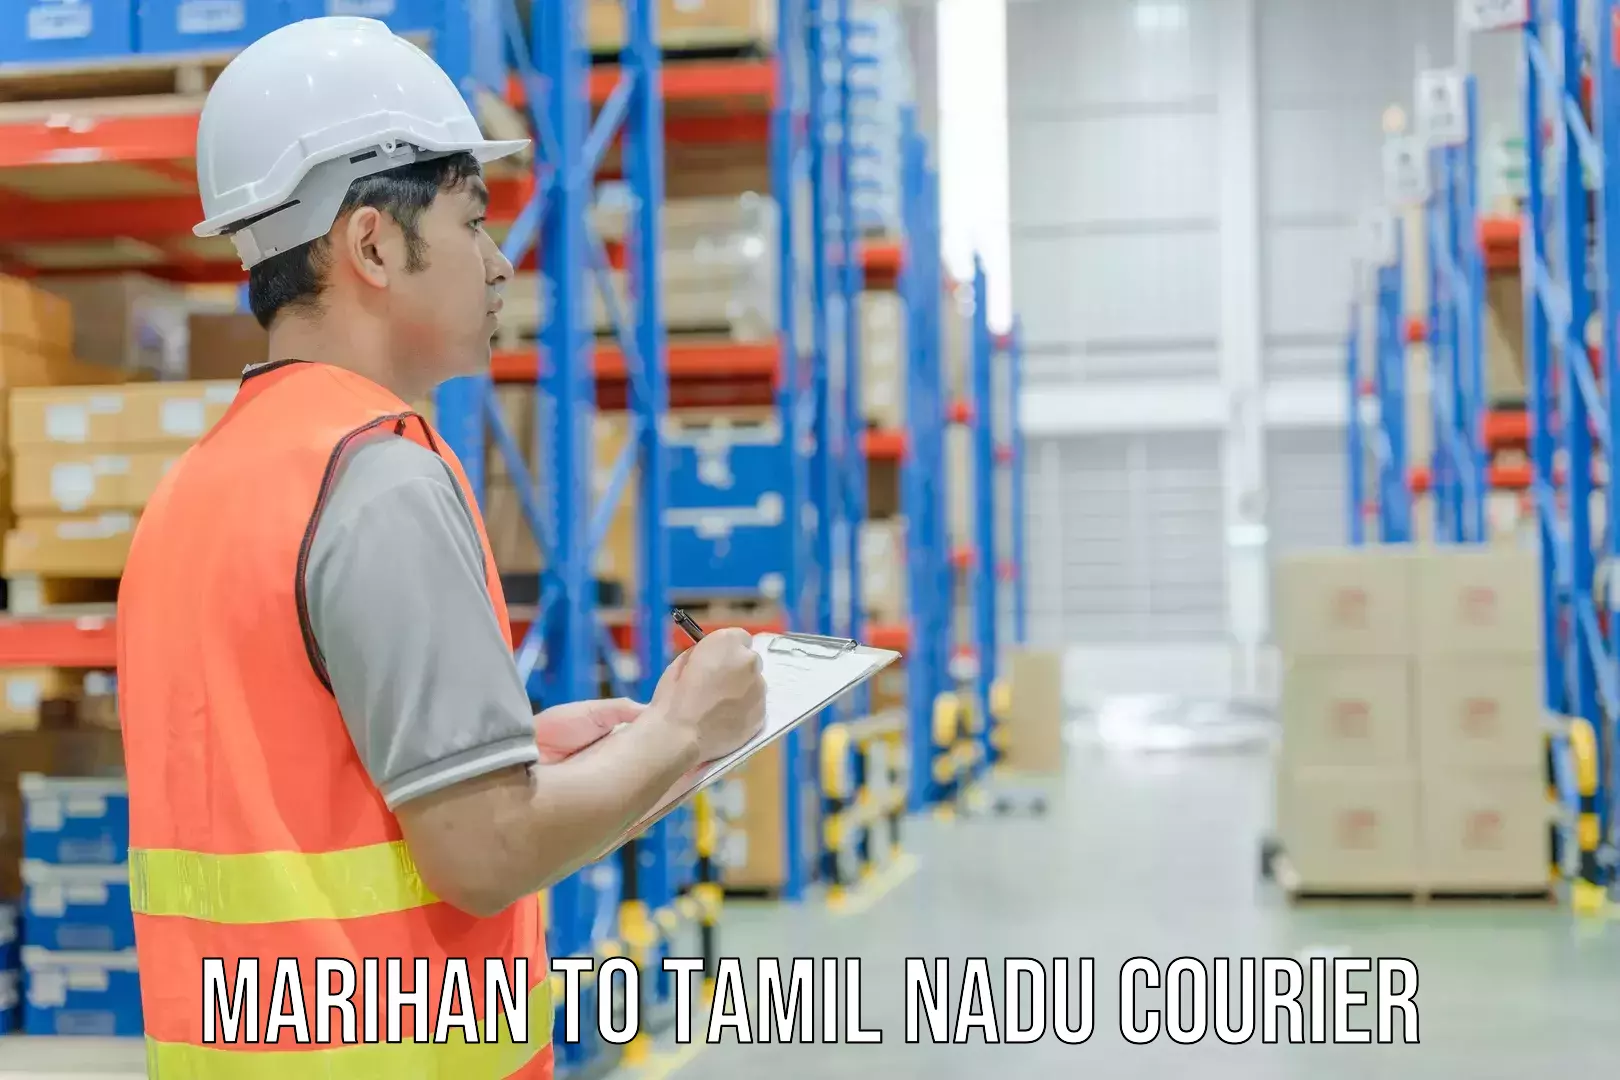 Courier services Marihan to Tamil Nadu